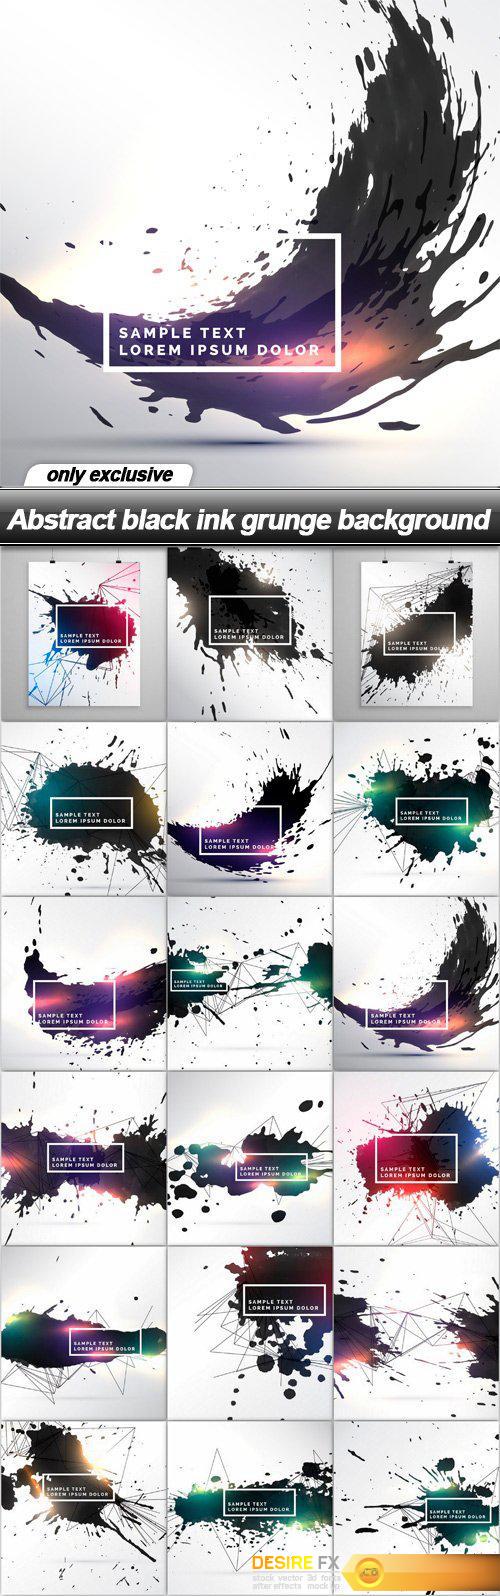 Abstract black ink grunge background - 18 EPS